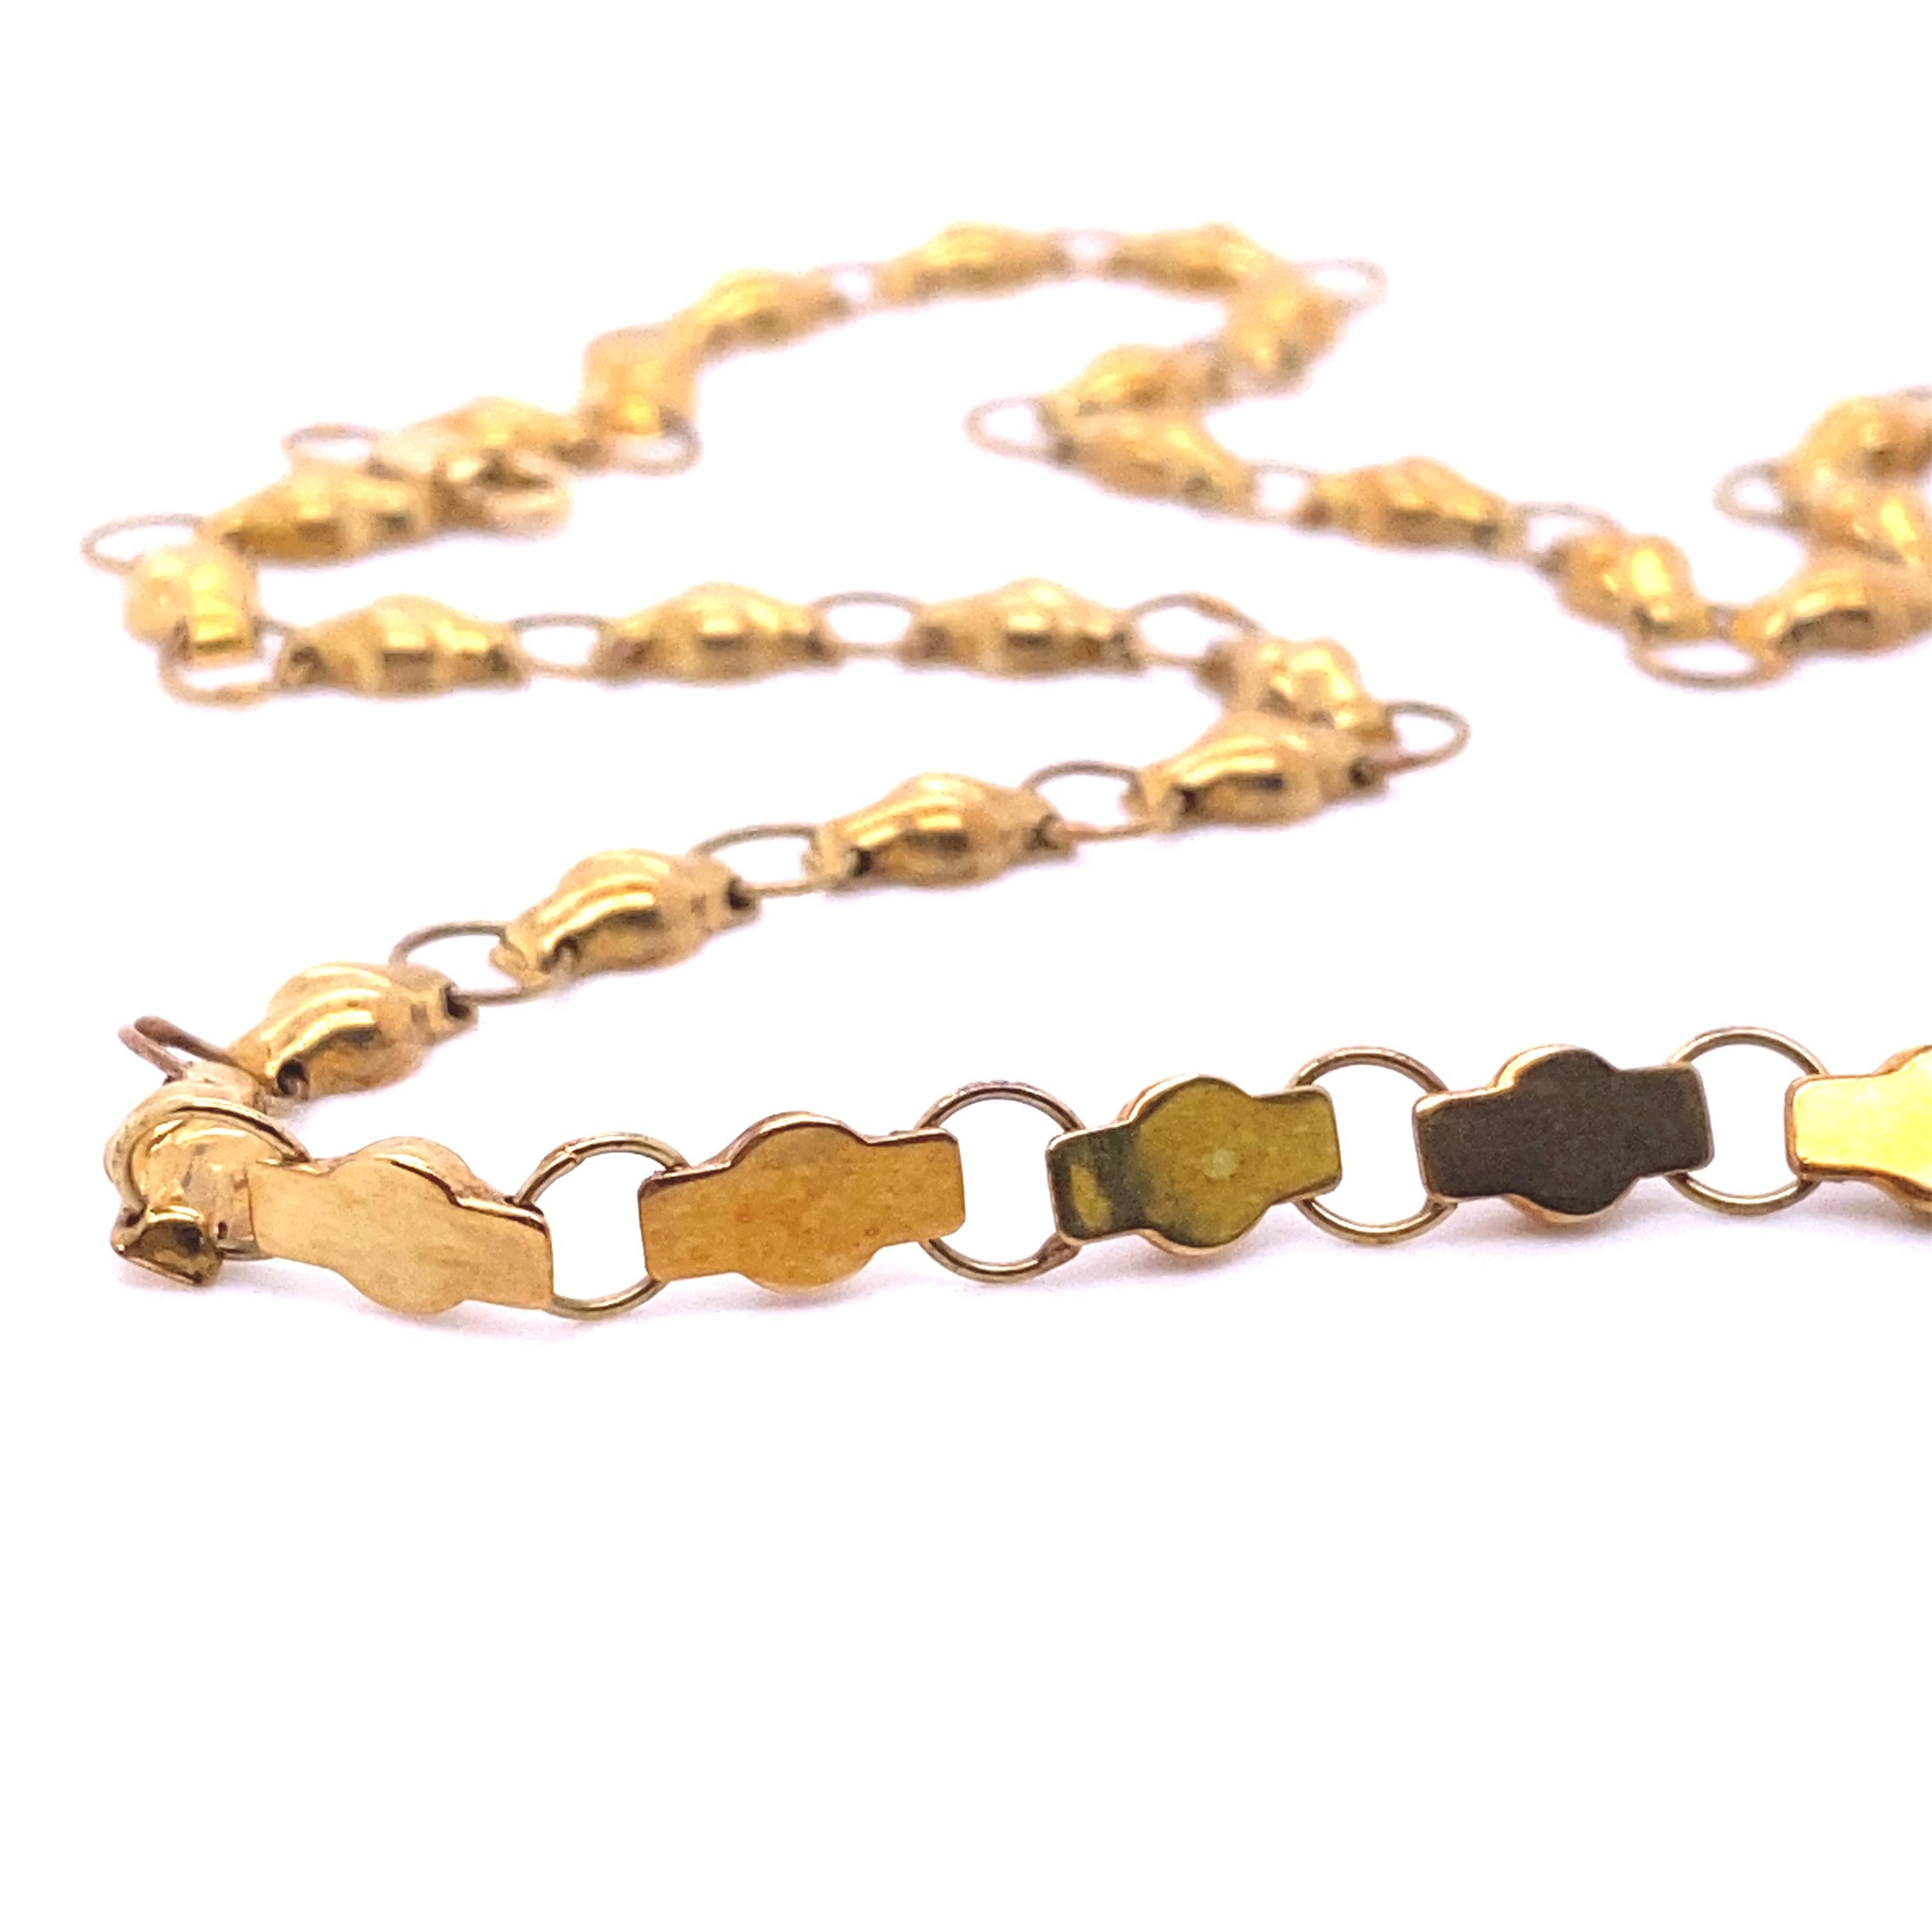 Women's or Men's Vintage, Antique, Solid 14kt Yellow Gold Chain Link Necklace